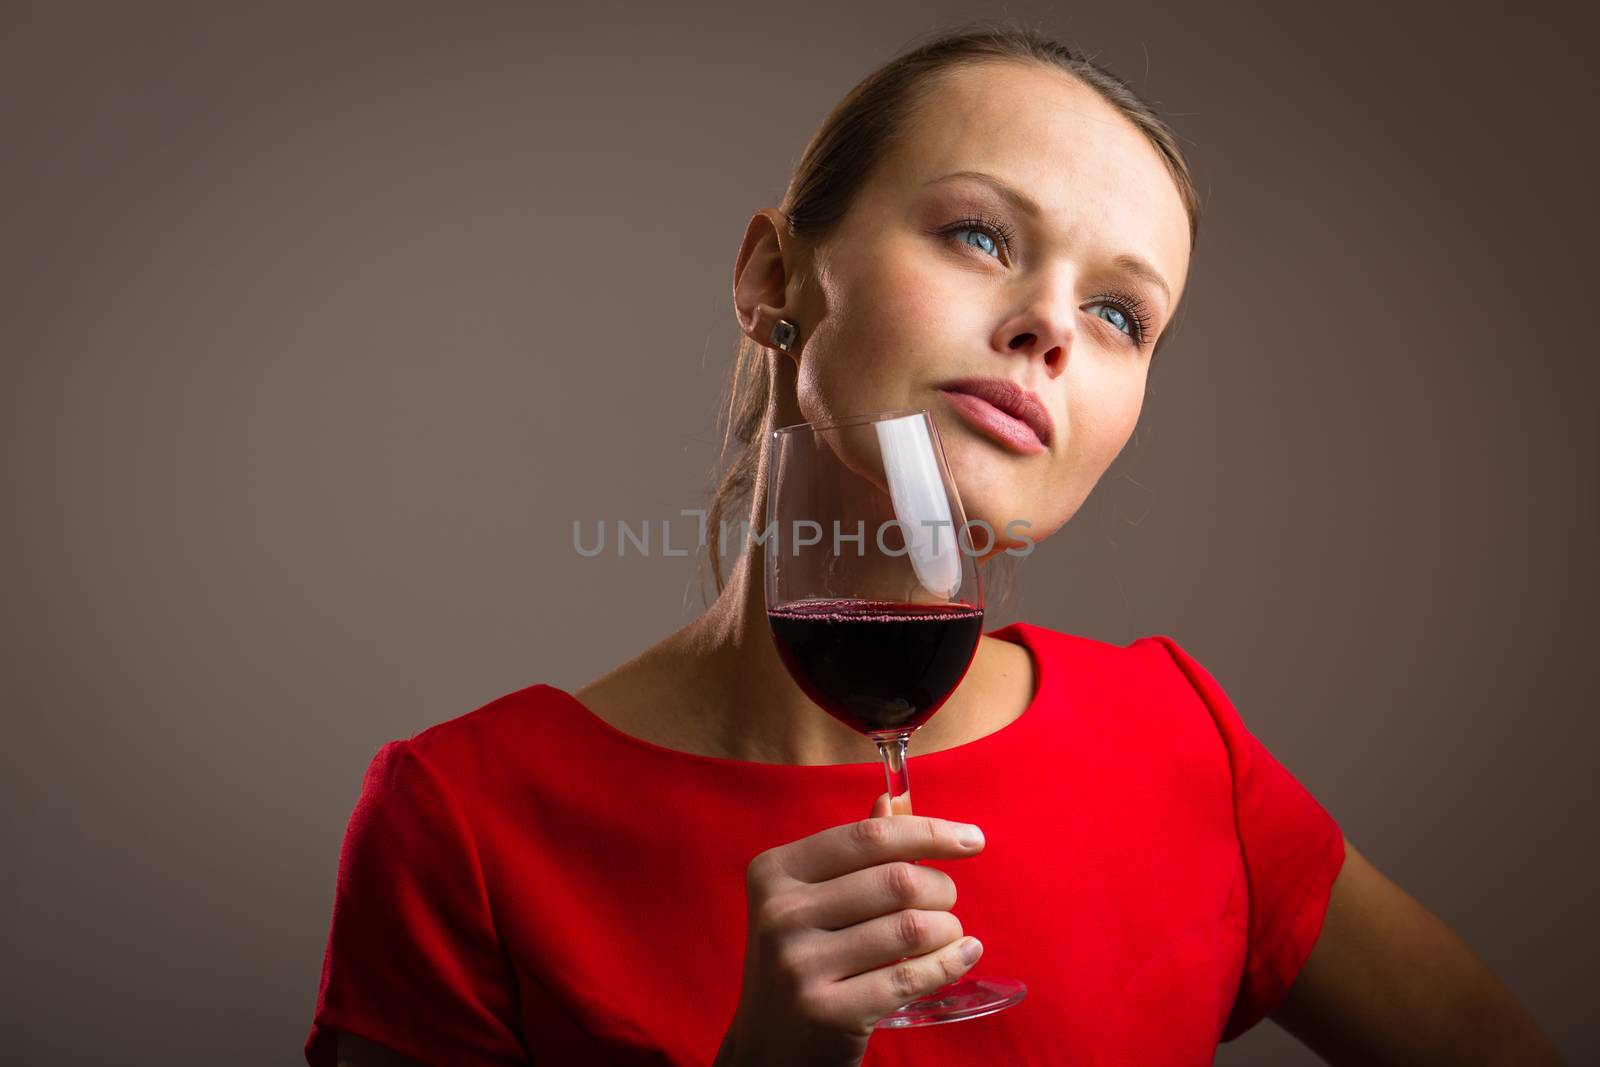 Elegant young woman in a red dress, having a glass of red wine by viktor_cap